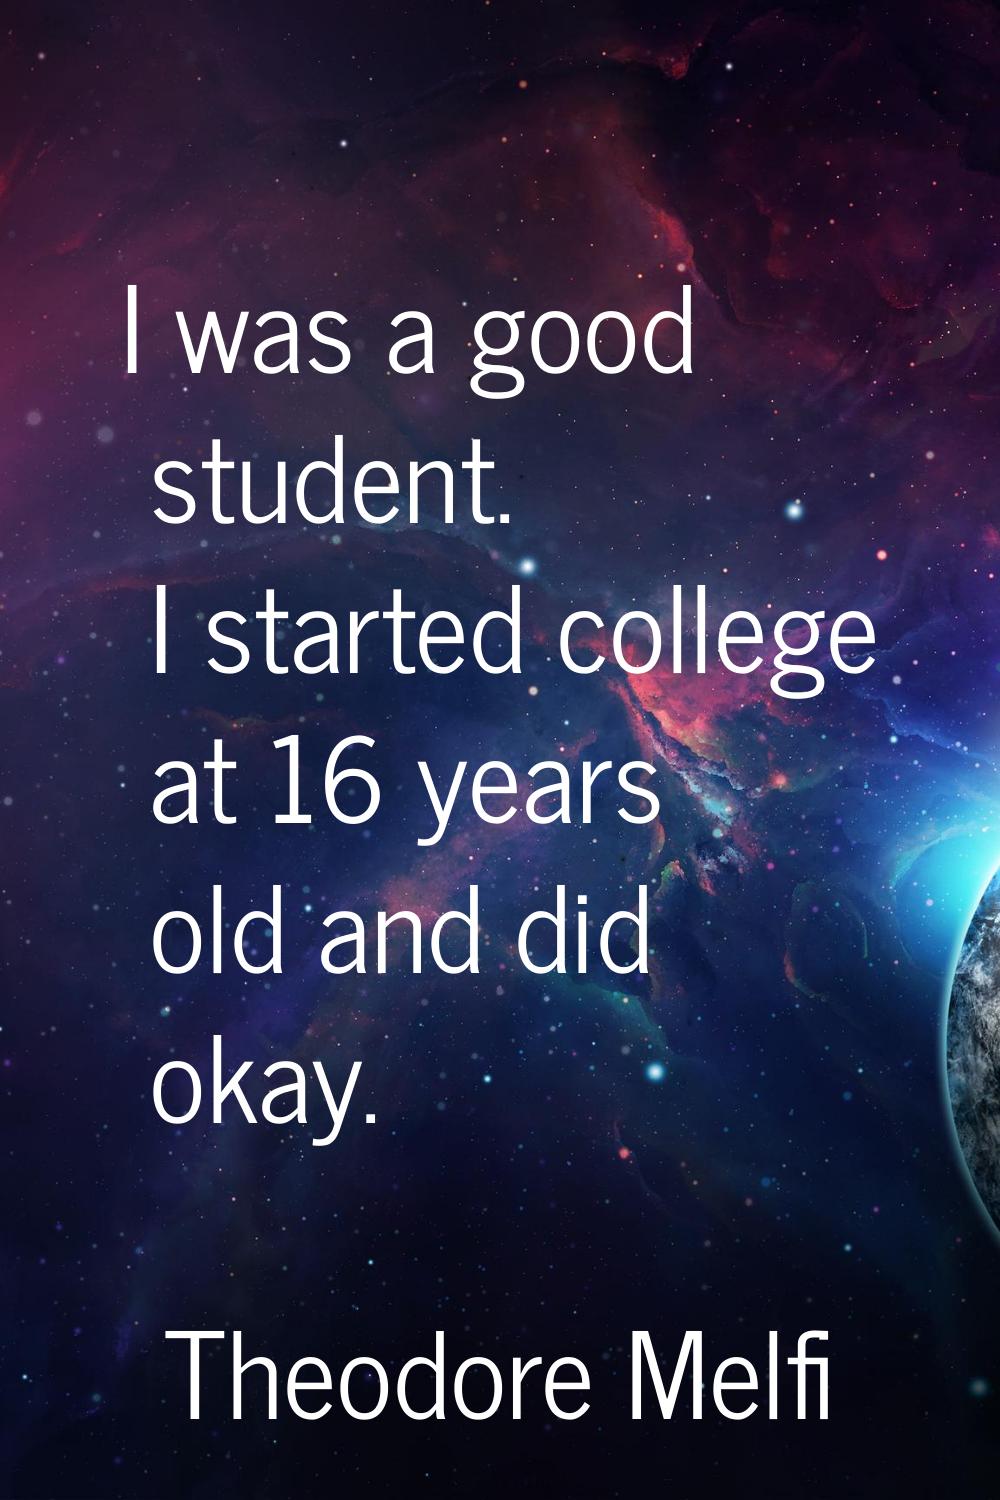 I was a good student. I started college at 16 years old and did okay.